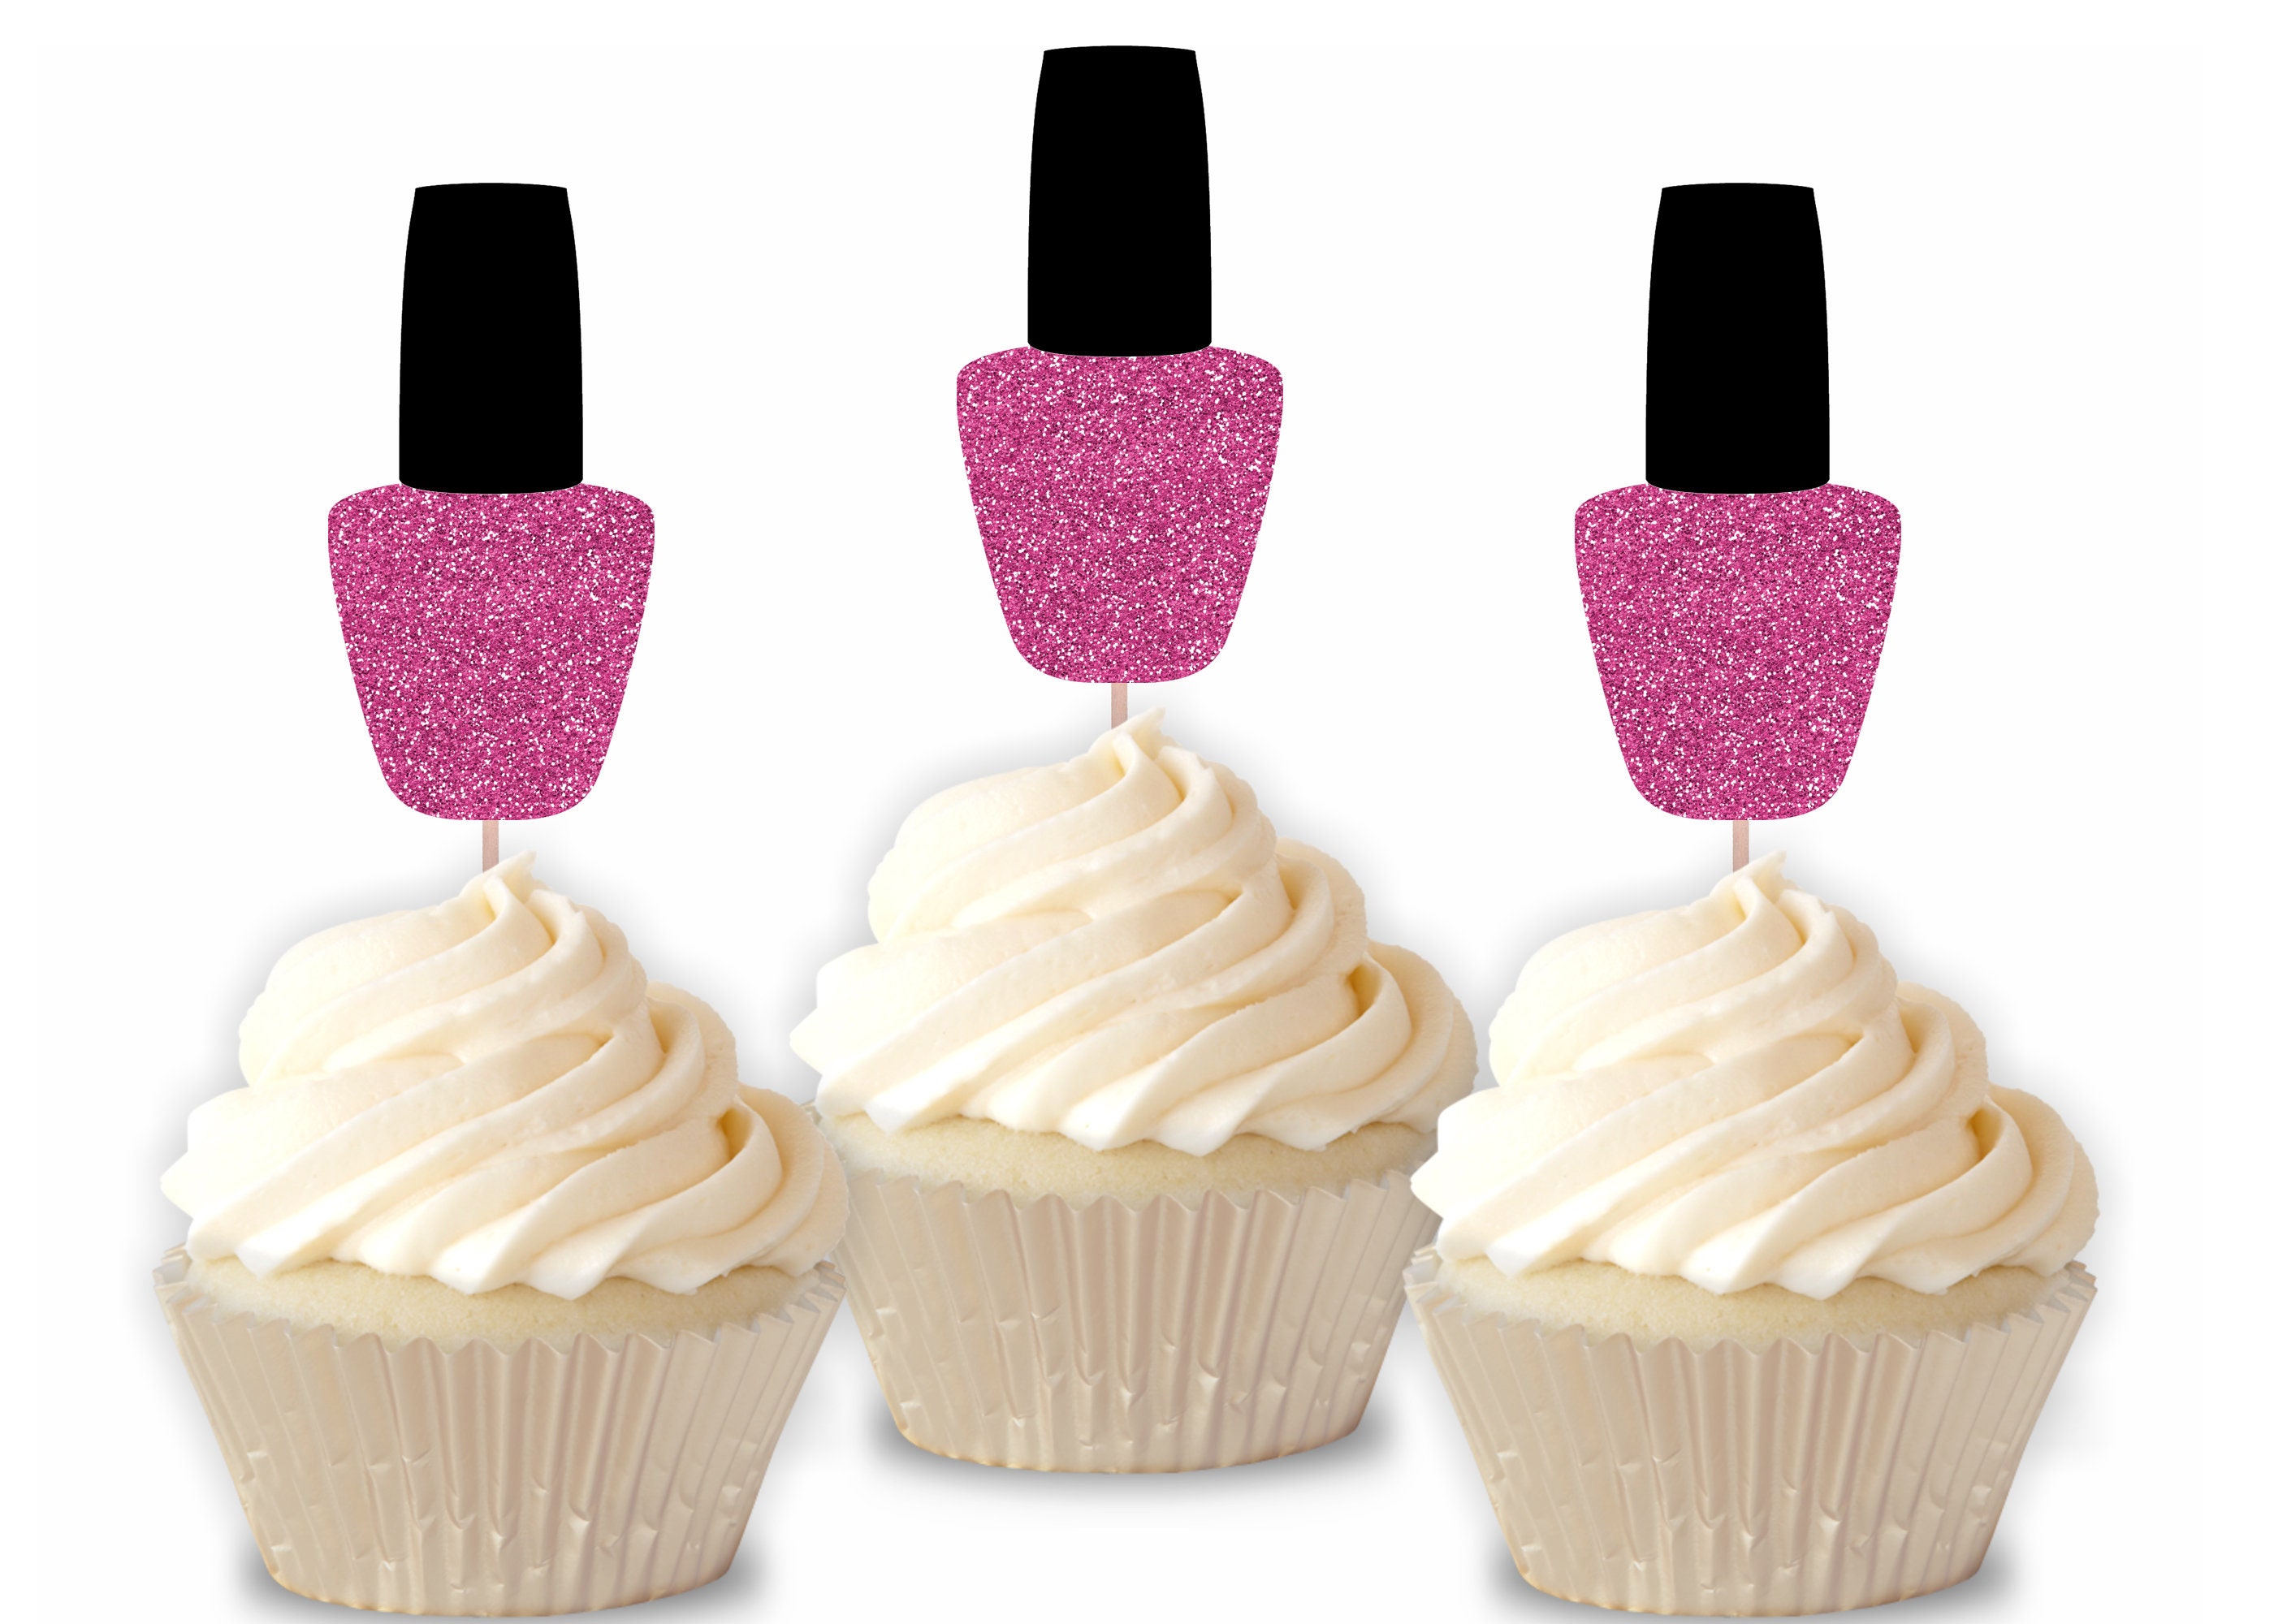 6. "Nail Art Cupcake Toppers" by Cake Topper Central - wide 3